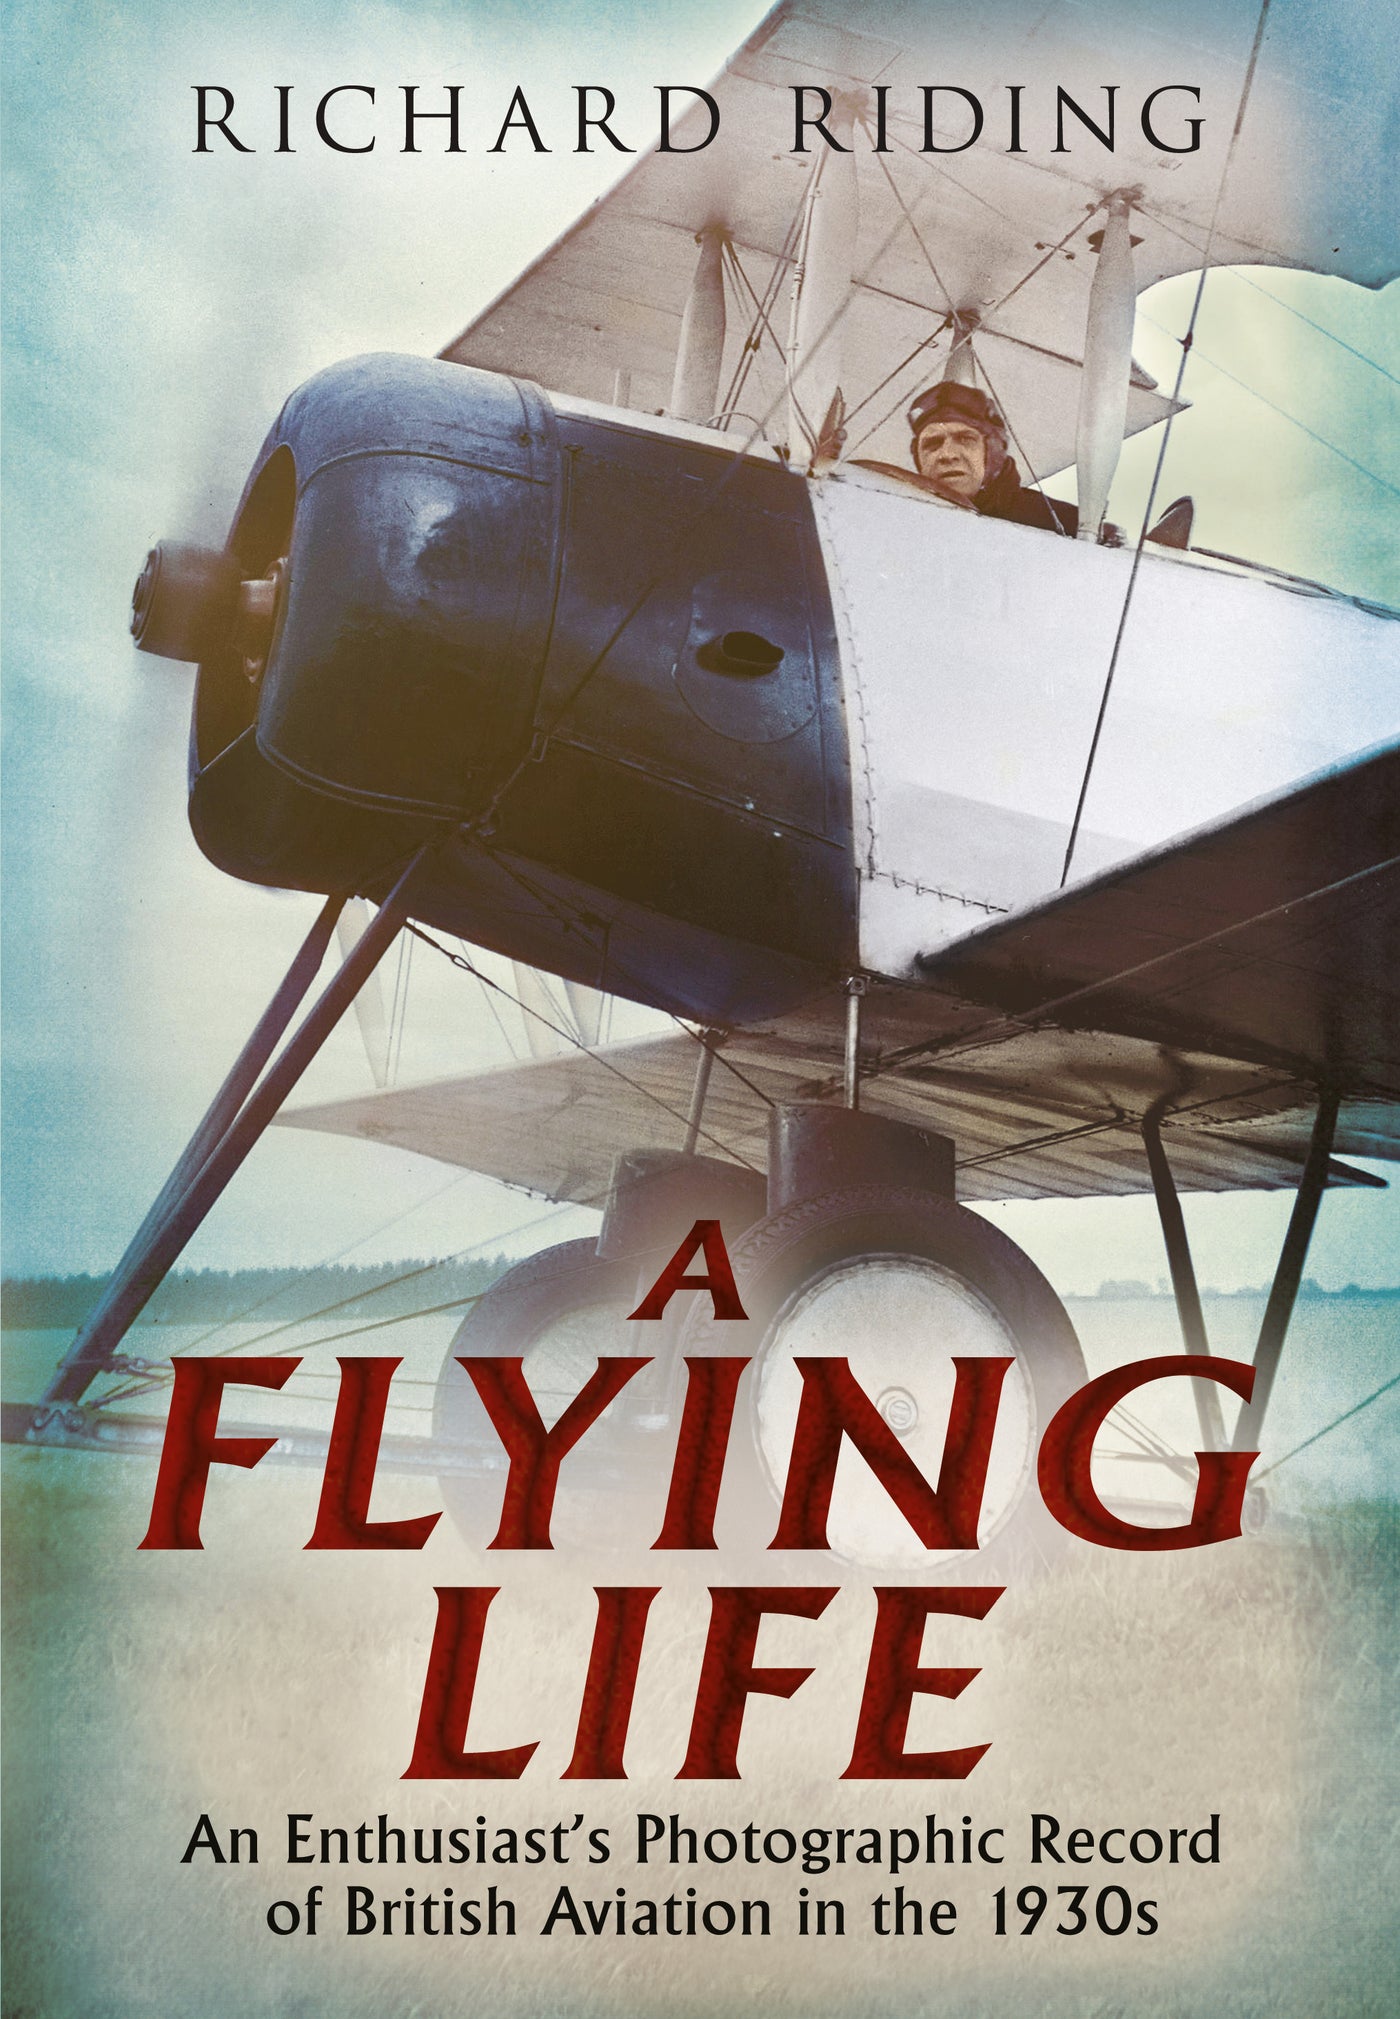 A Flying Life